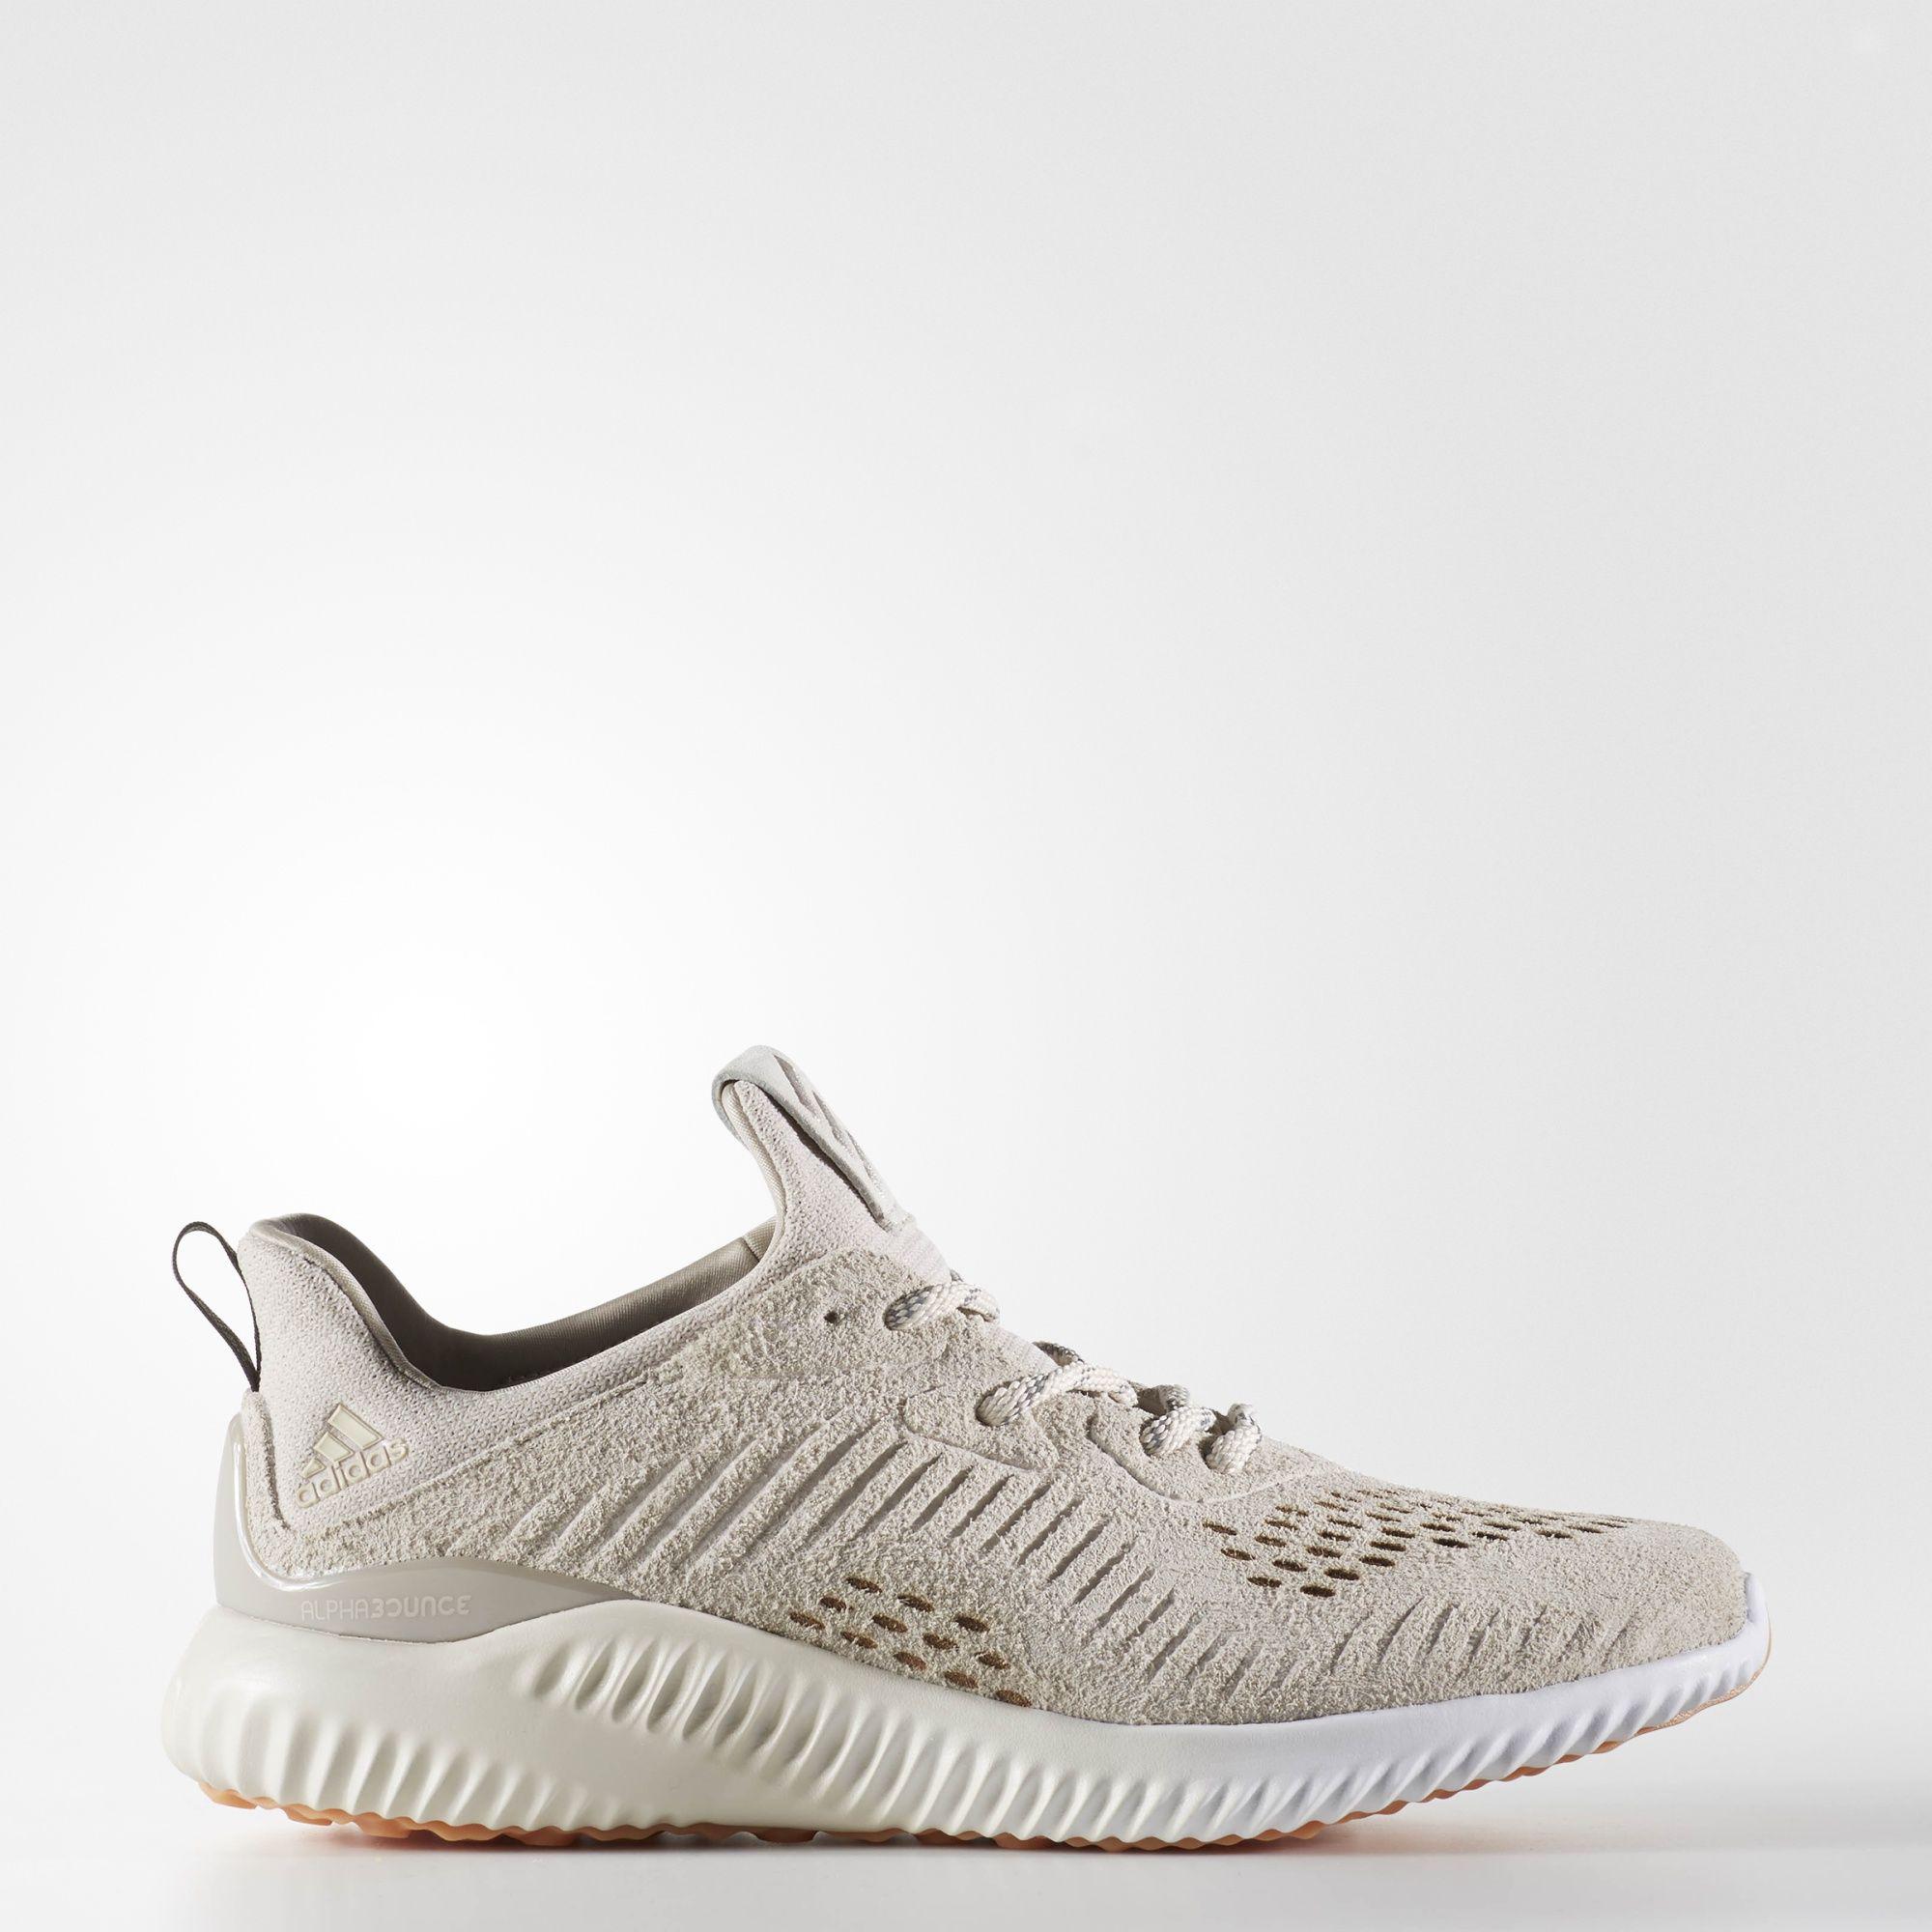 adidas Alphabounce Leather Shoes in 